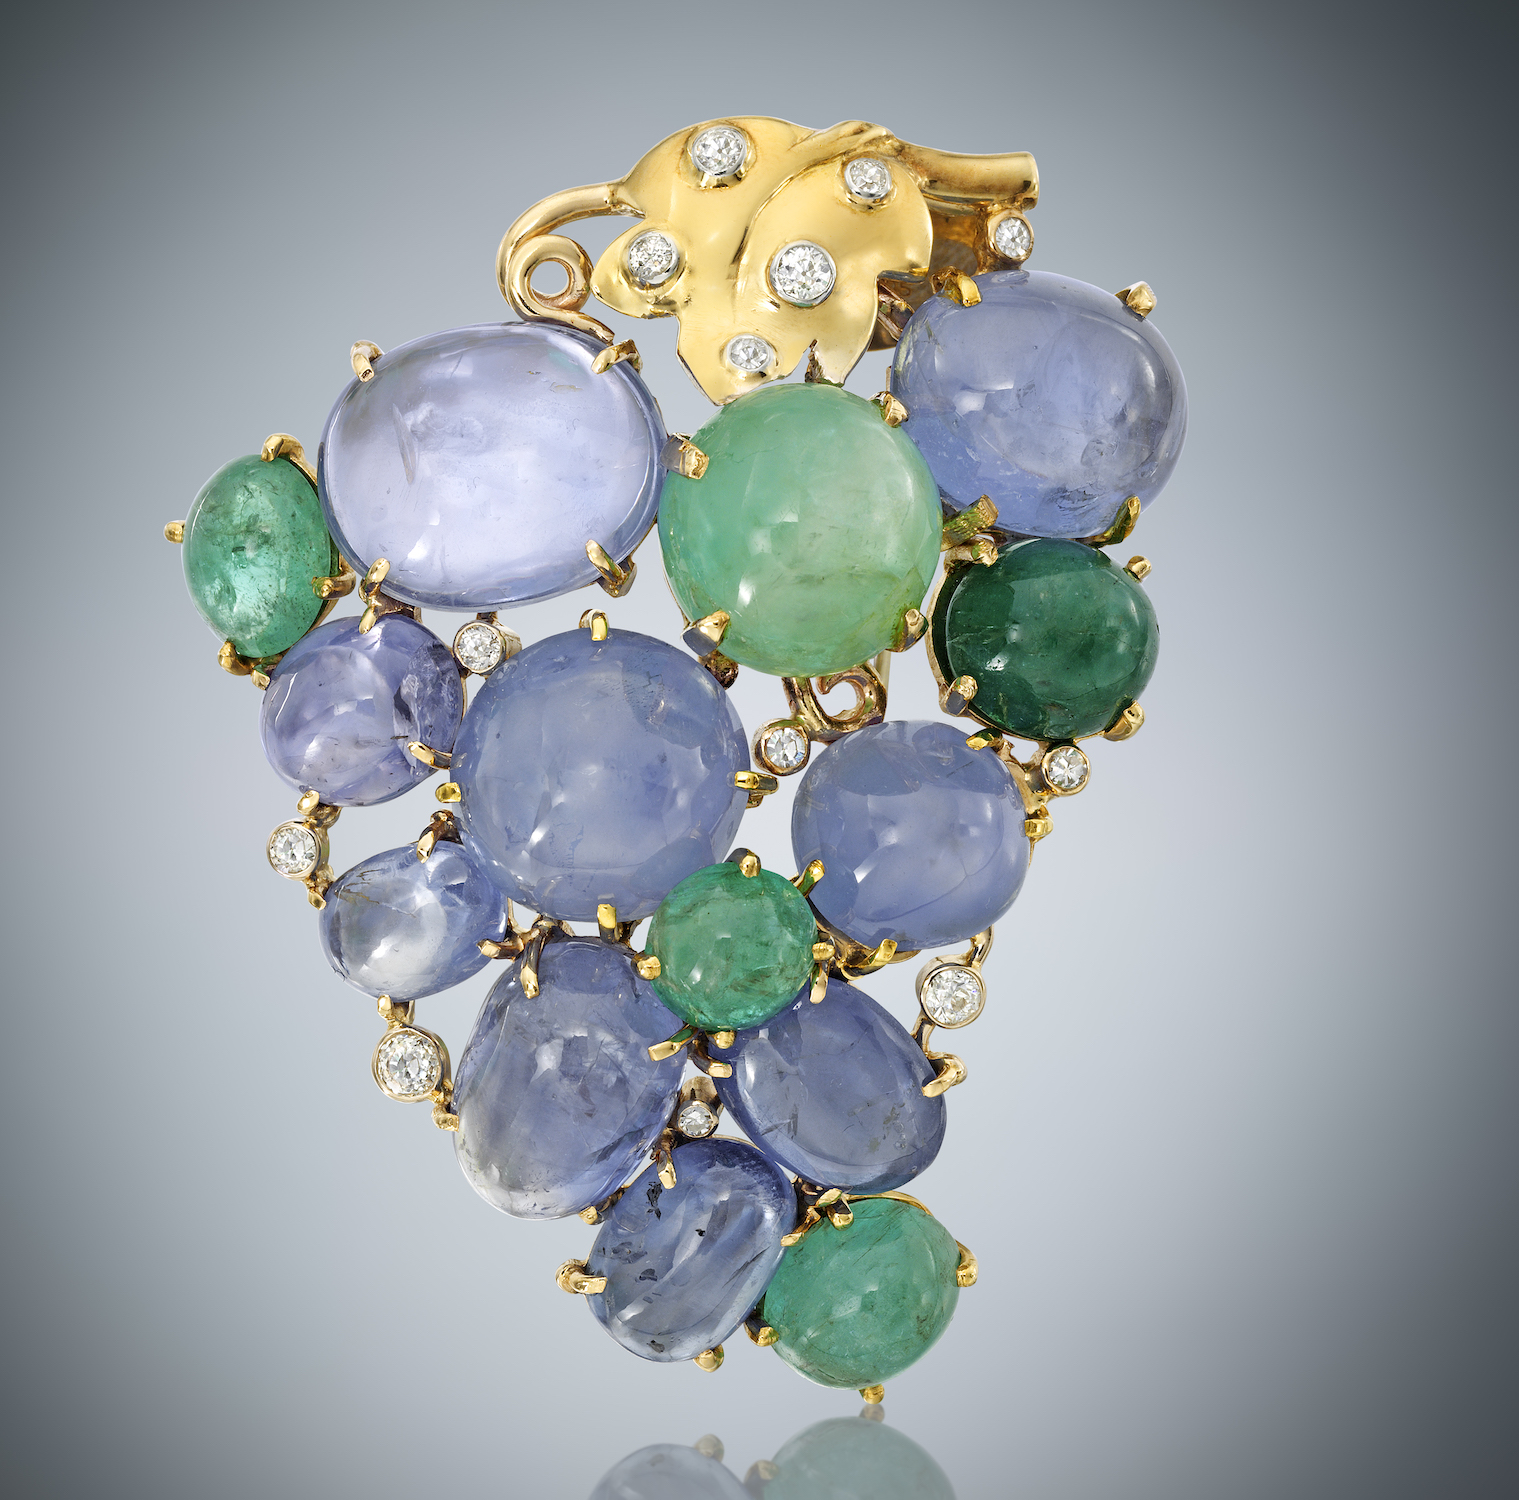 Seaman Schepps “Grape” cluster clip/brooch set with 9 large cabochon sapphires (approx. 85+ carats TW), 5 large cabochon emeralds (approx. 35+ carats TW) and 13 round diamonds (approx. 2 carats TW) set in a 14K yellow mounting with leaves and vines, signed Seaman Schepps and 14k, Dimensions: 2 3/4 inches long x 2 1/4 inches wide, c. 1940